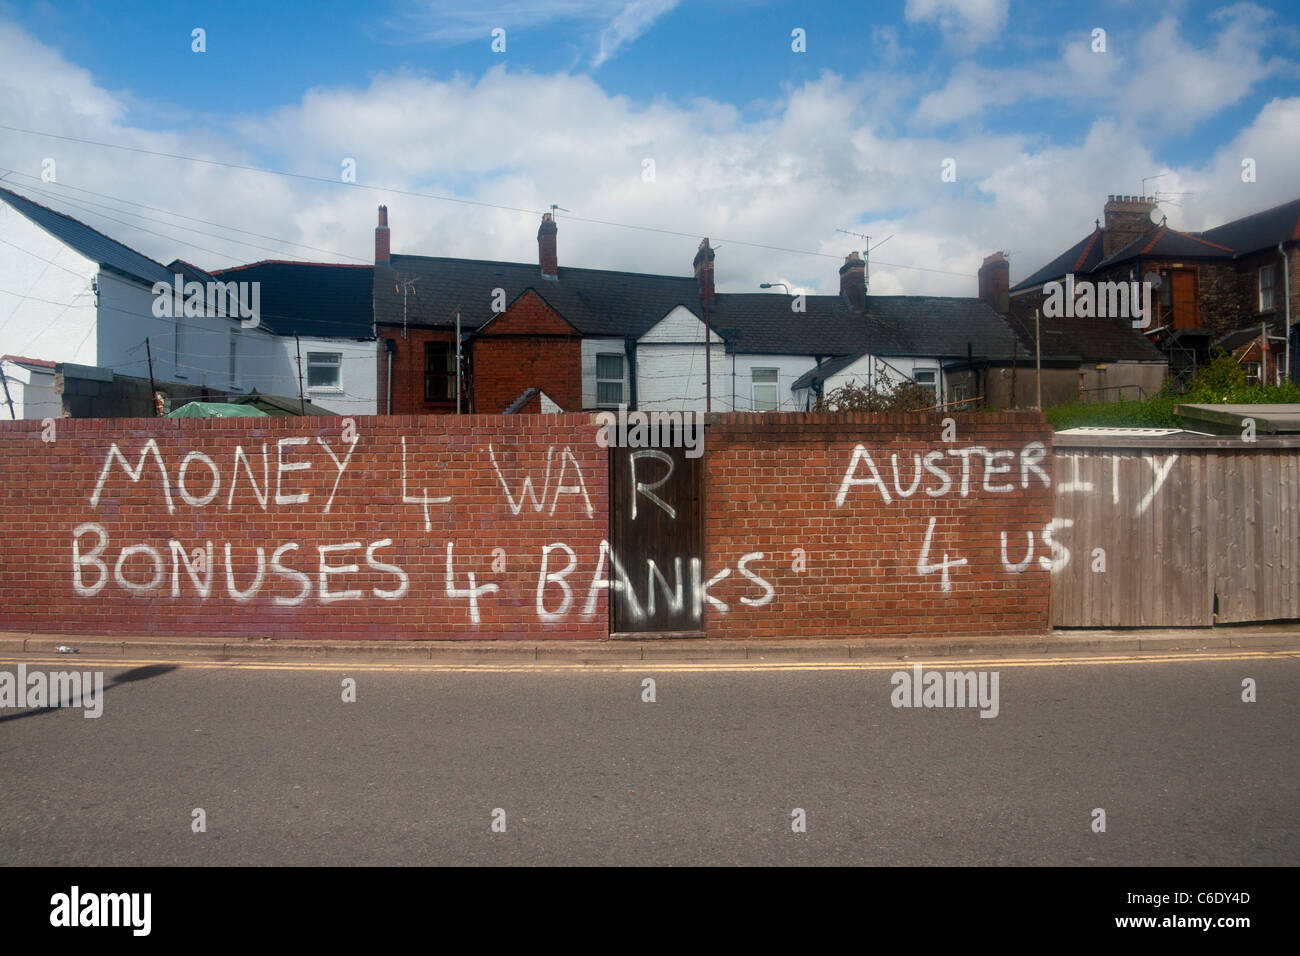 Political graffiti condemning economic policy Money 4 War Bonuses 4 Banks Austerity 4 Us White paint on red brick wall Stock Photo